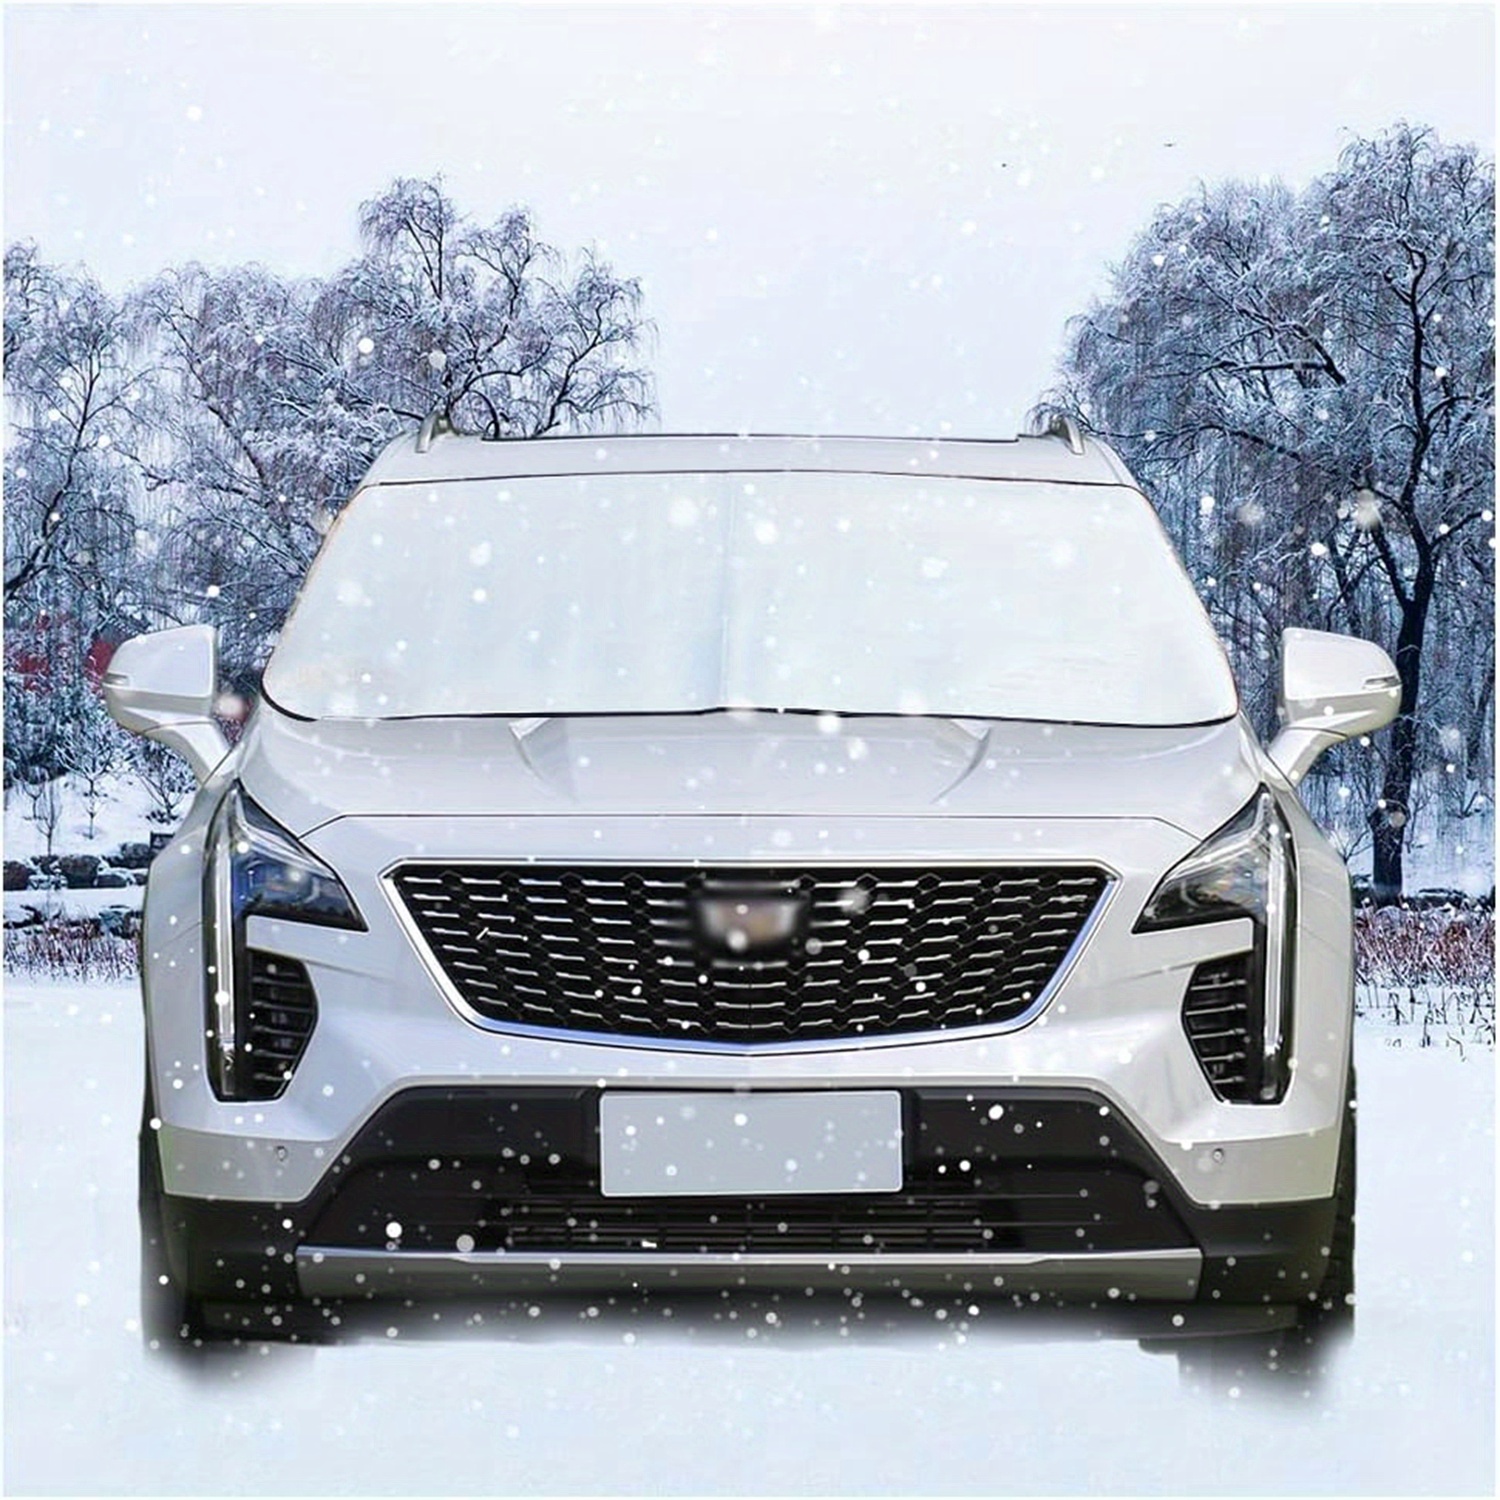 Windshield Cover For Ice And Snow, Foldable Car Exterior Accessories For  Sun Heat Protection/Wind And Snow, Suitable For Cars, Compact SUVs